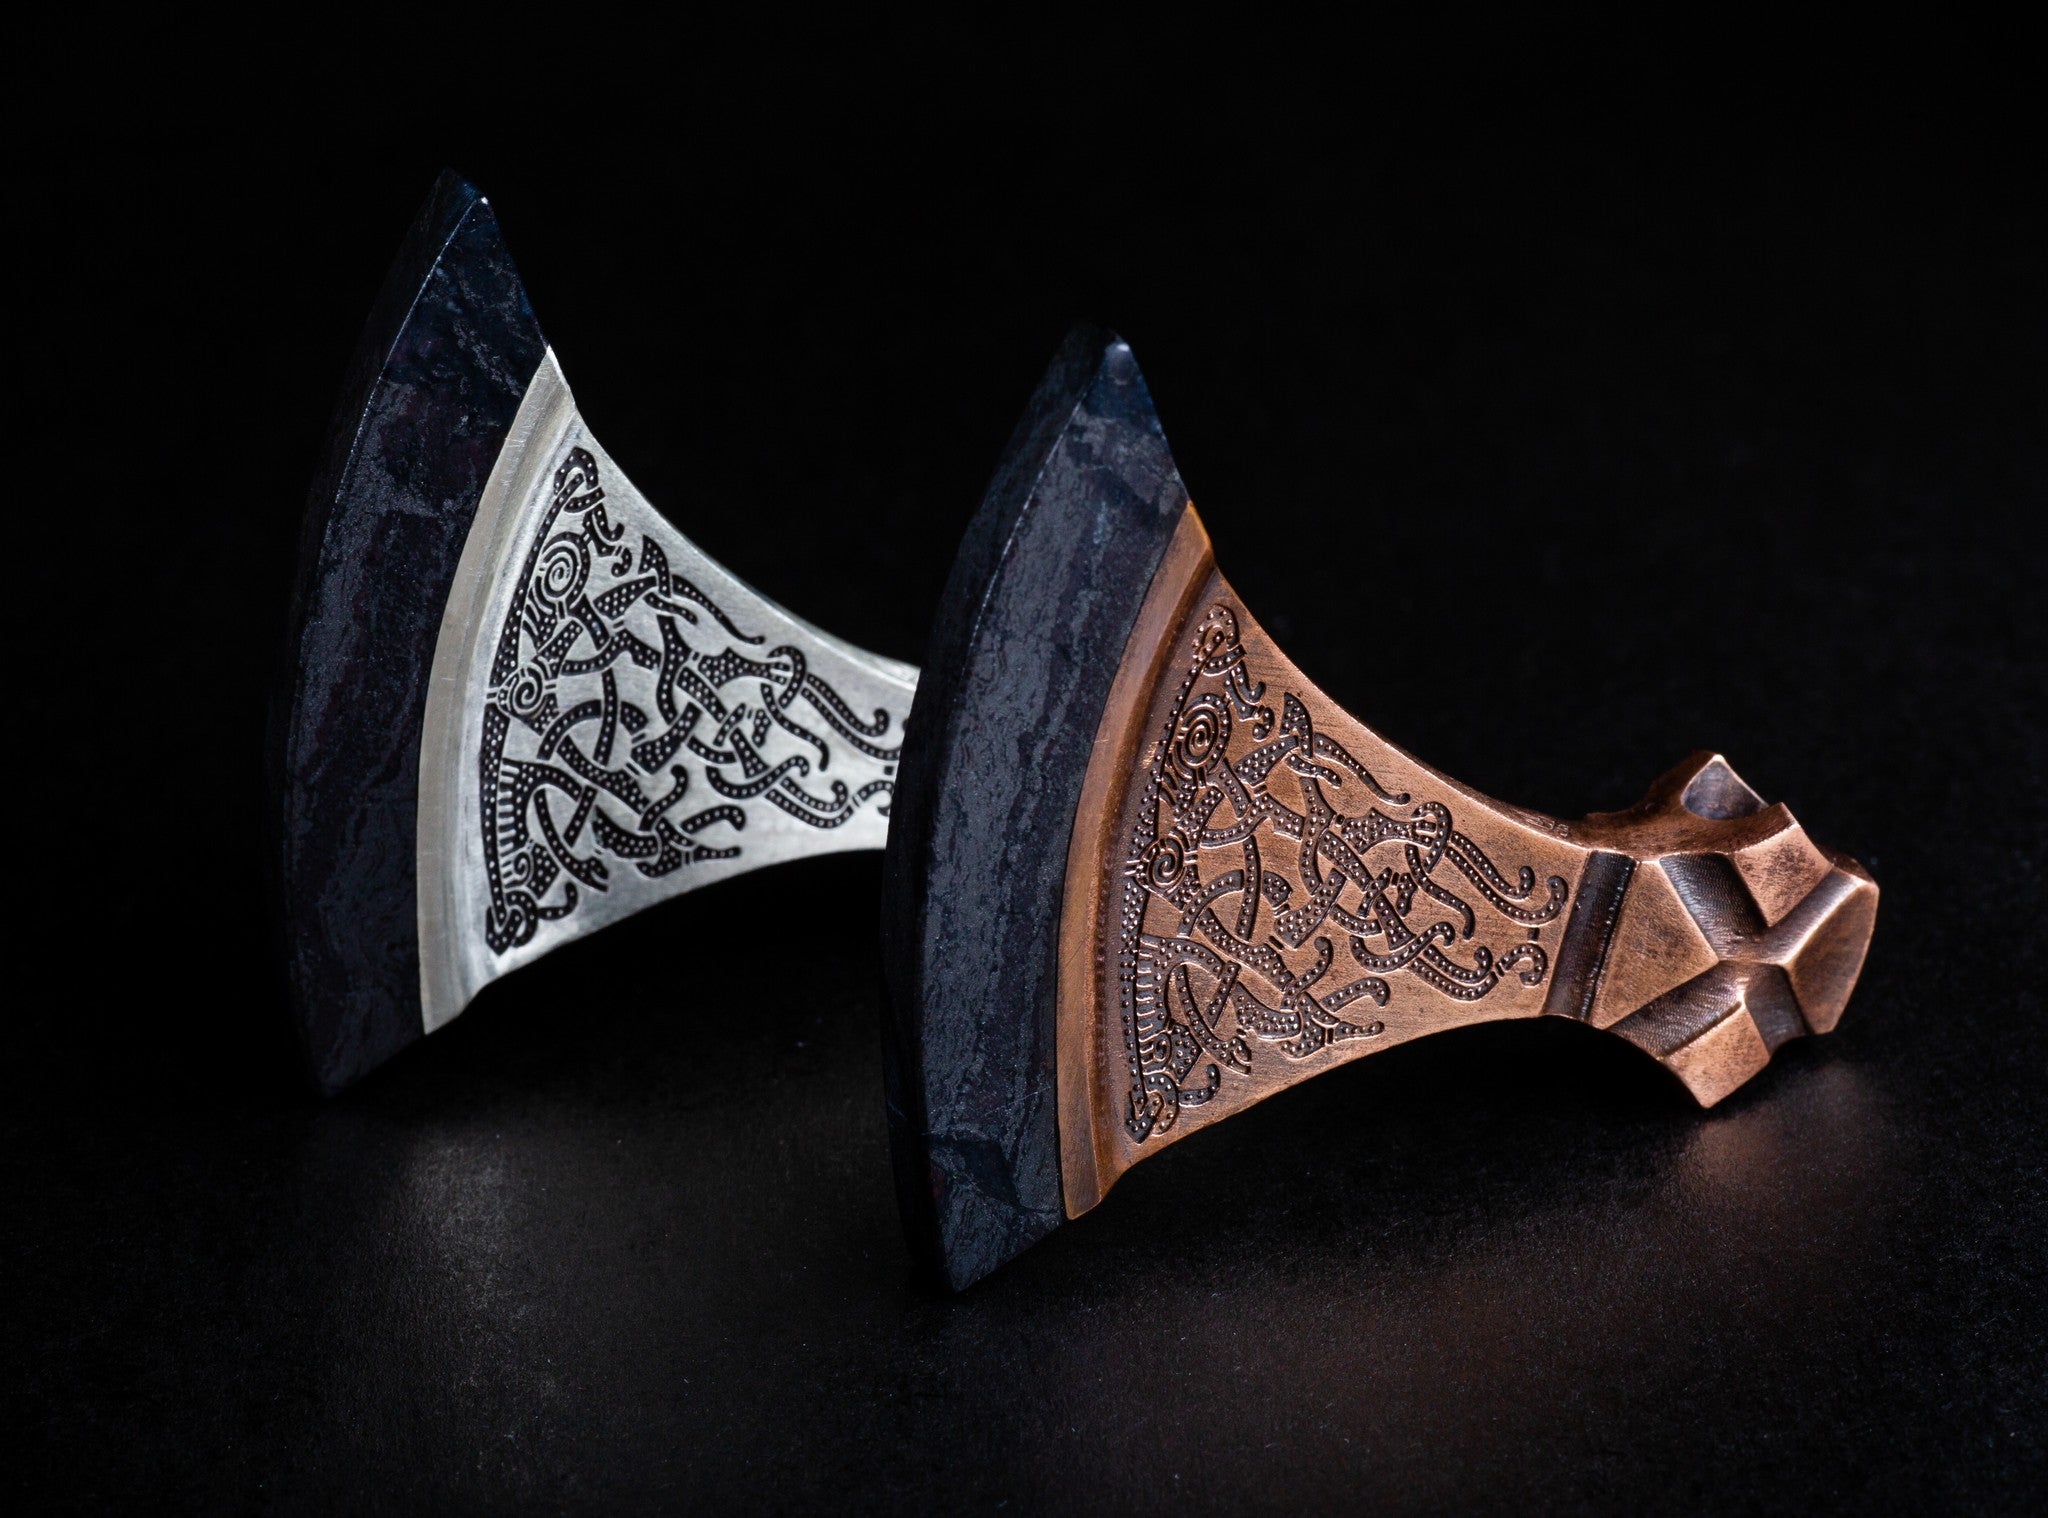 grey stone blades of silver and bronze axes